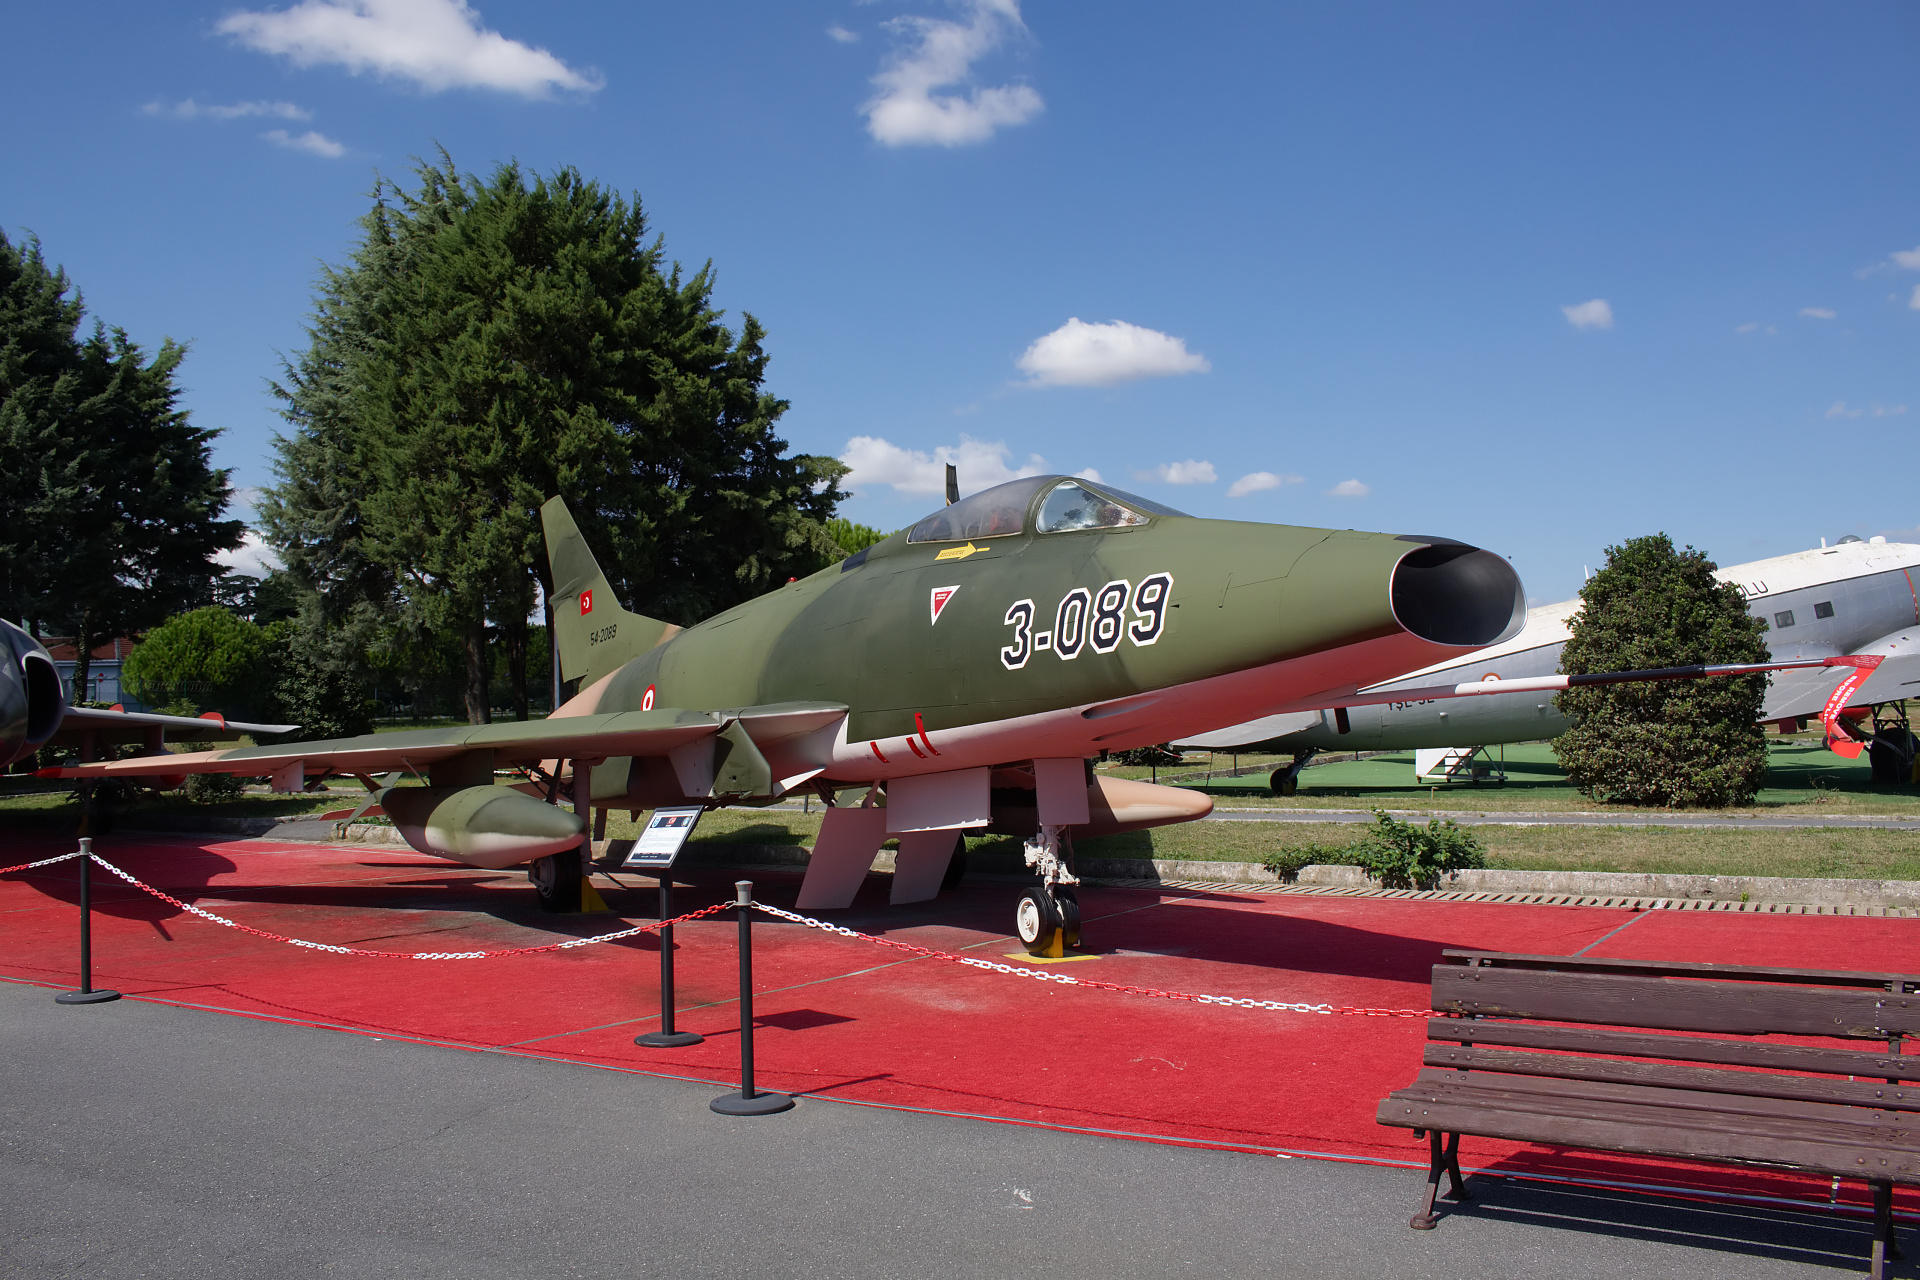 North American F-100C Super Sabre, 54-2089 (3-089), Turkish Air Force (Aircraft » Turkish Air Force Museum)